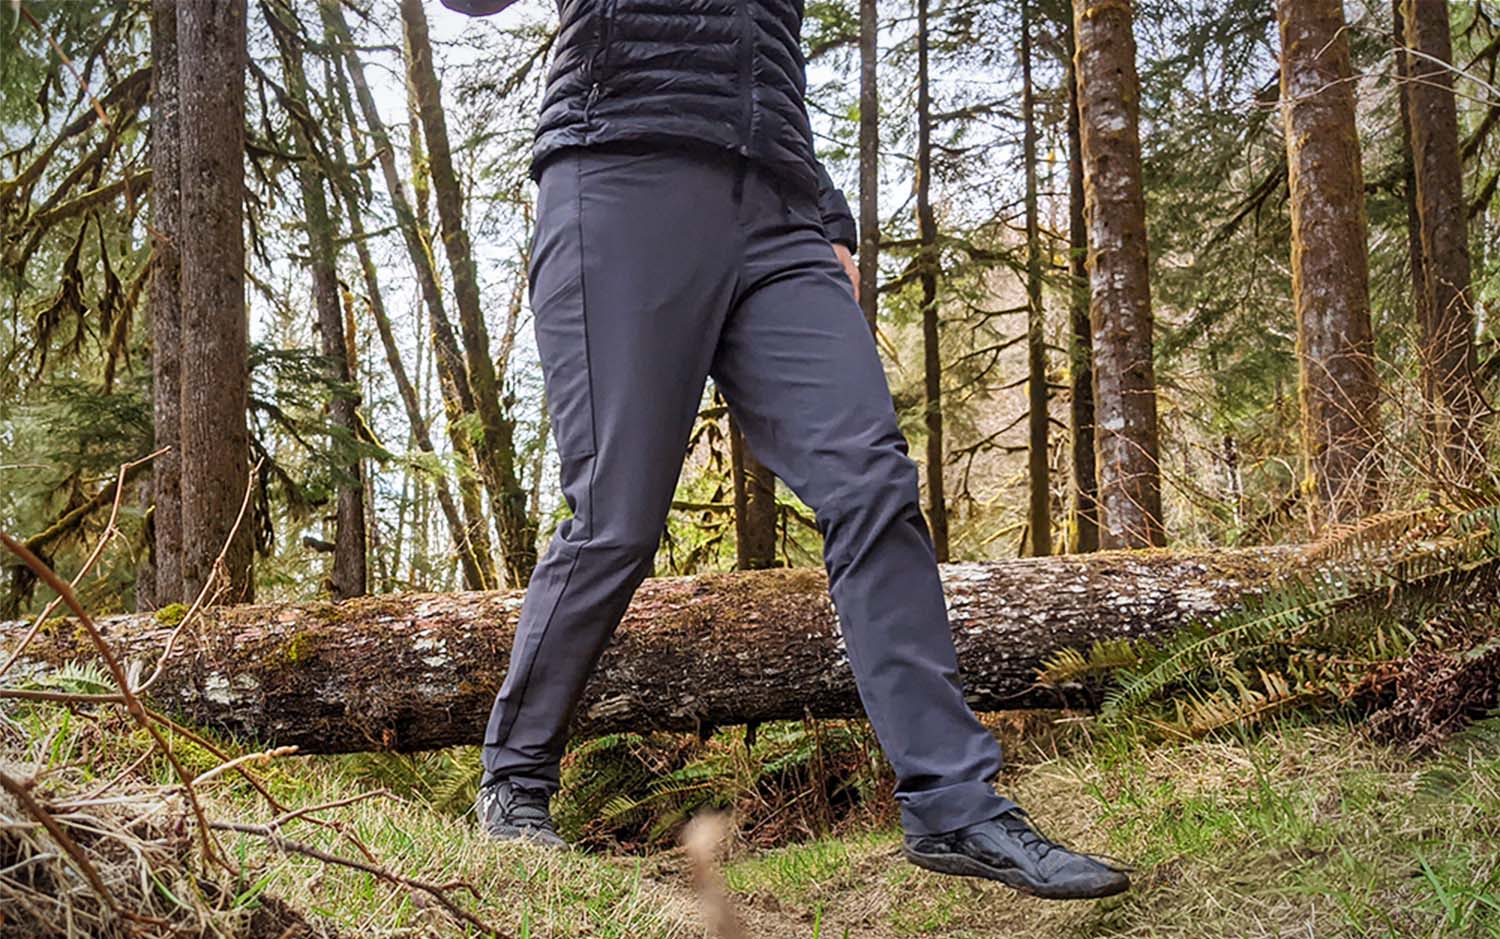 A person from the waist down walking in the woods wearing grey best hiking pants